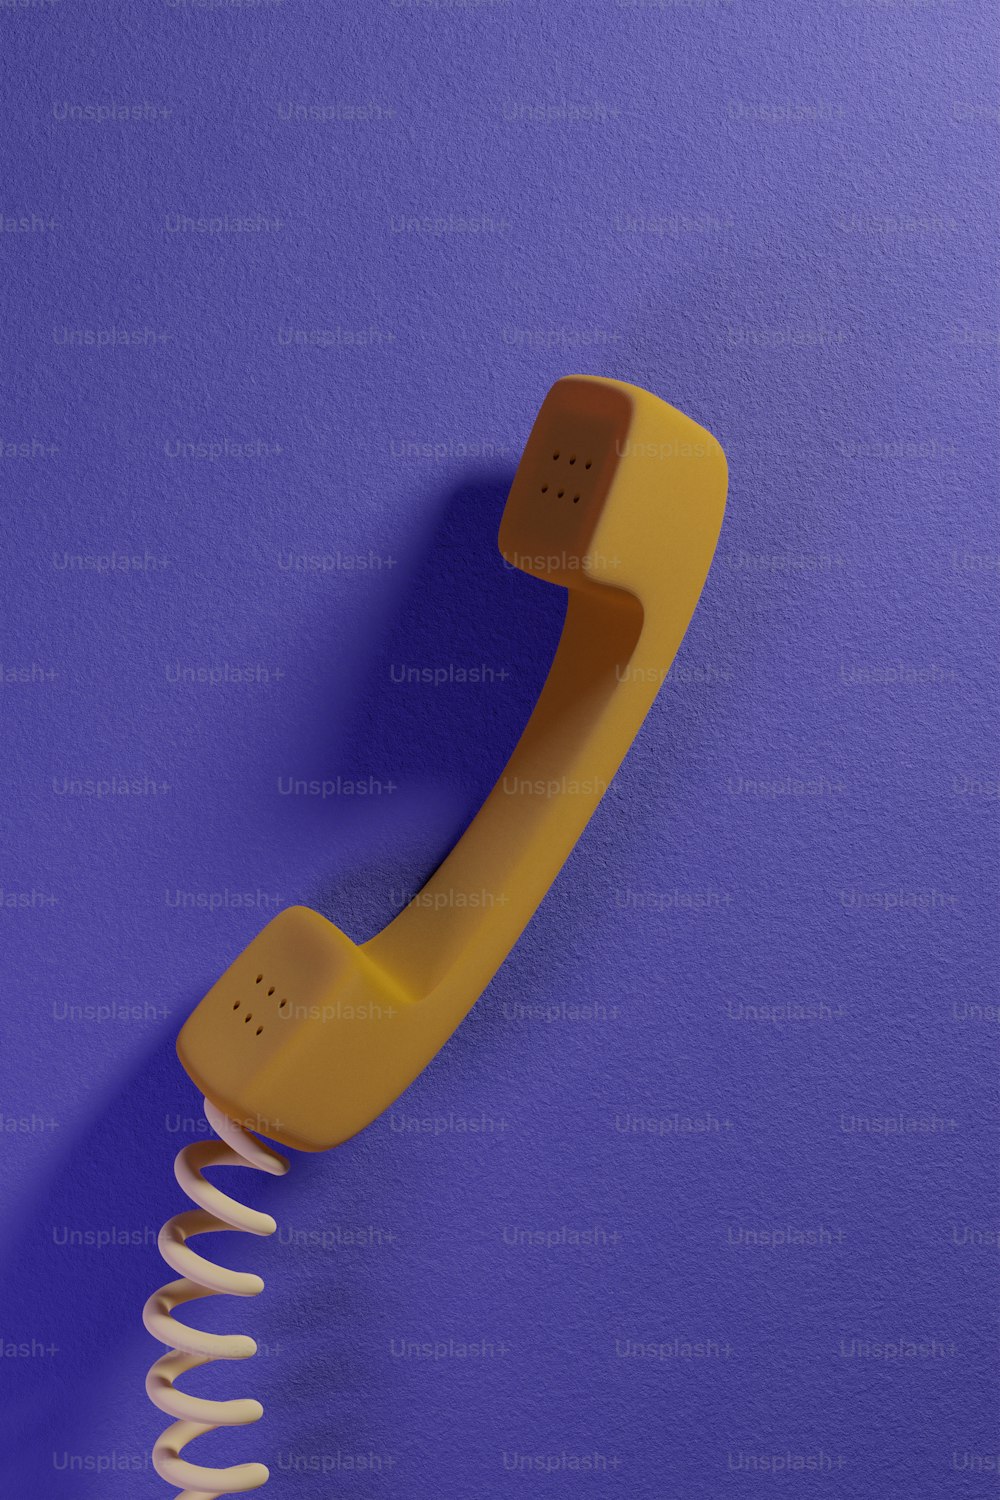 a yellow telephone on a purple background